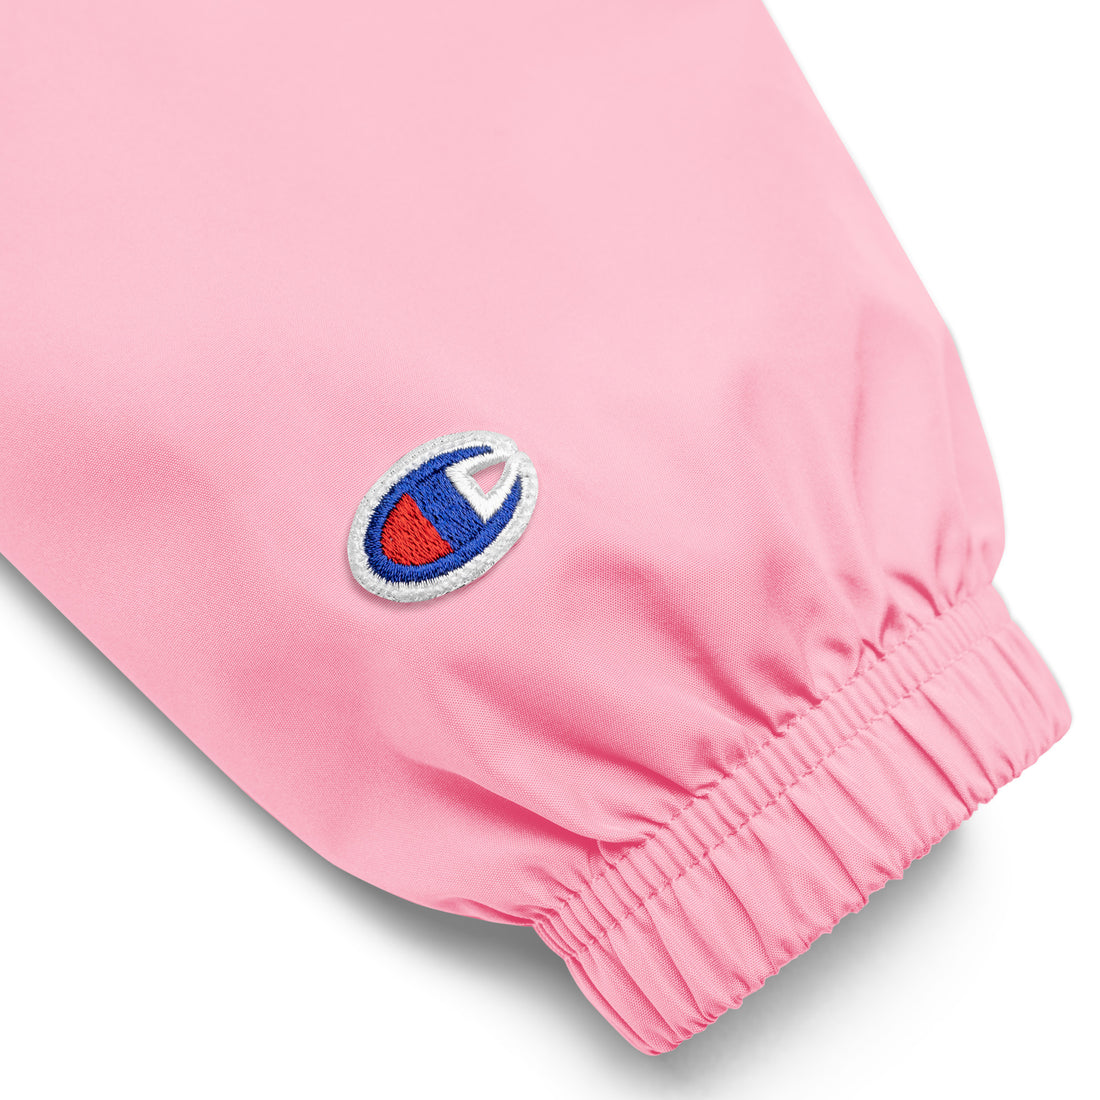 Greenside Embroidered Champion Packable Jacket